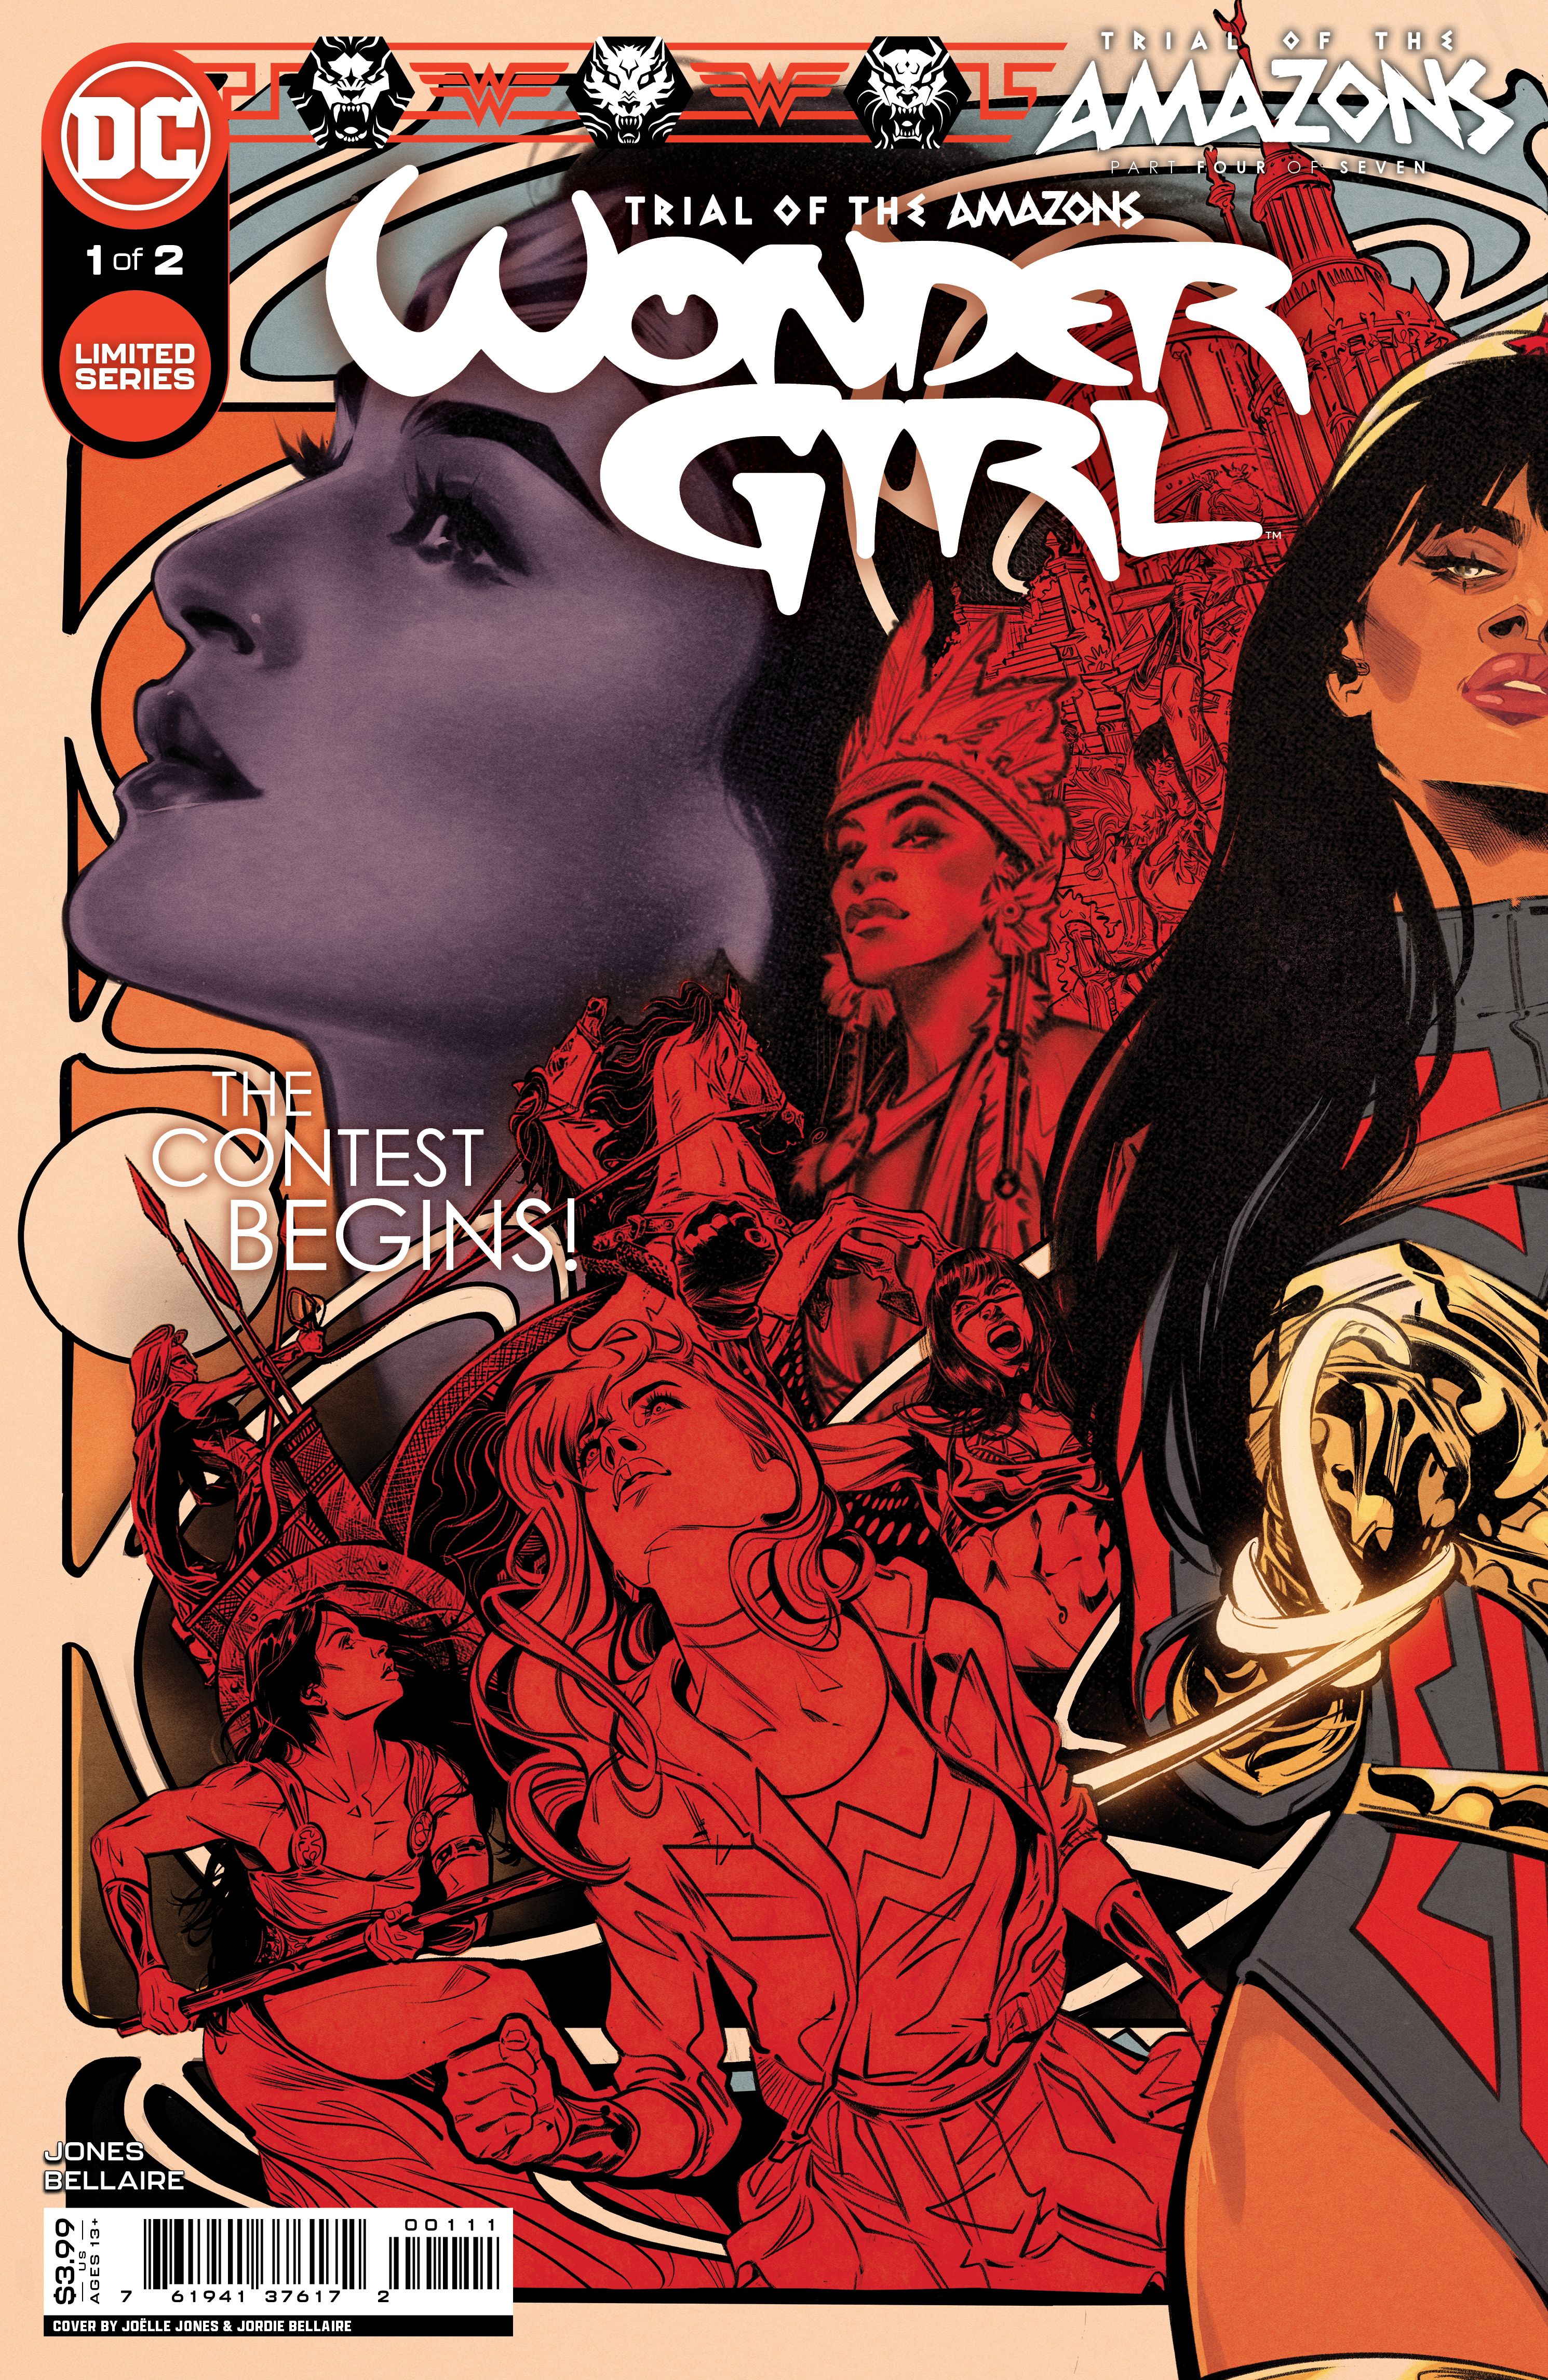 Trial of the Amazons: Wonder Girl Comic